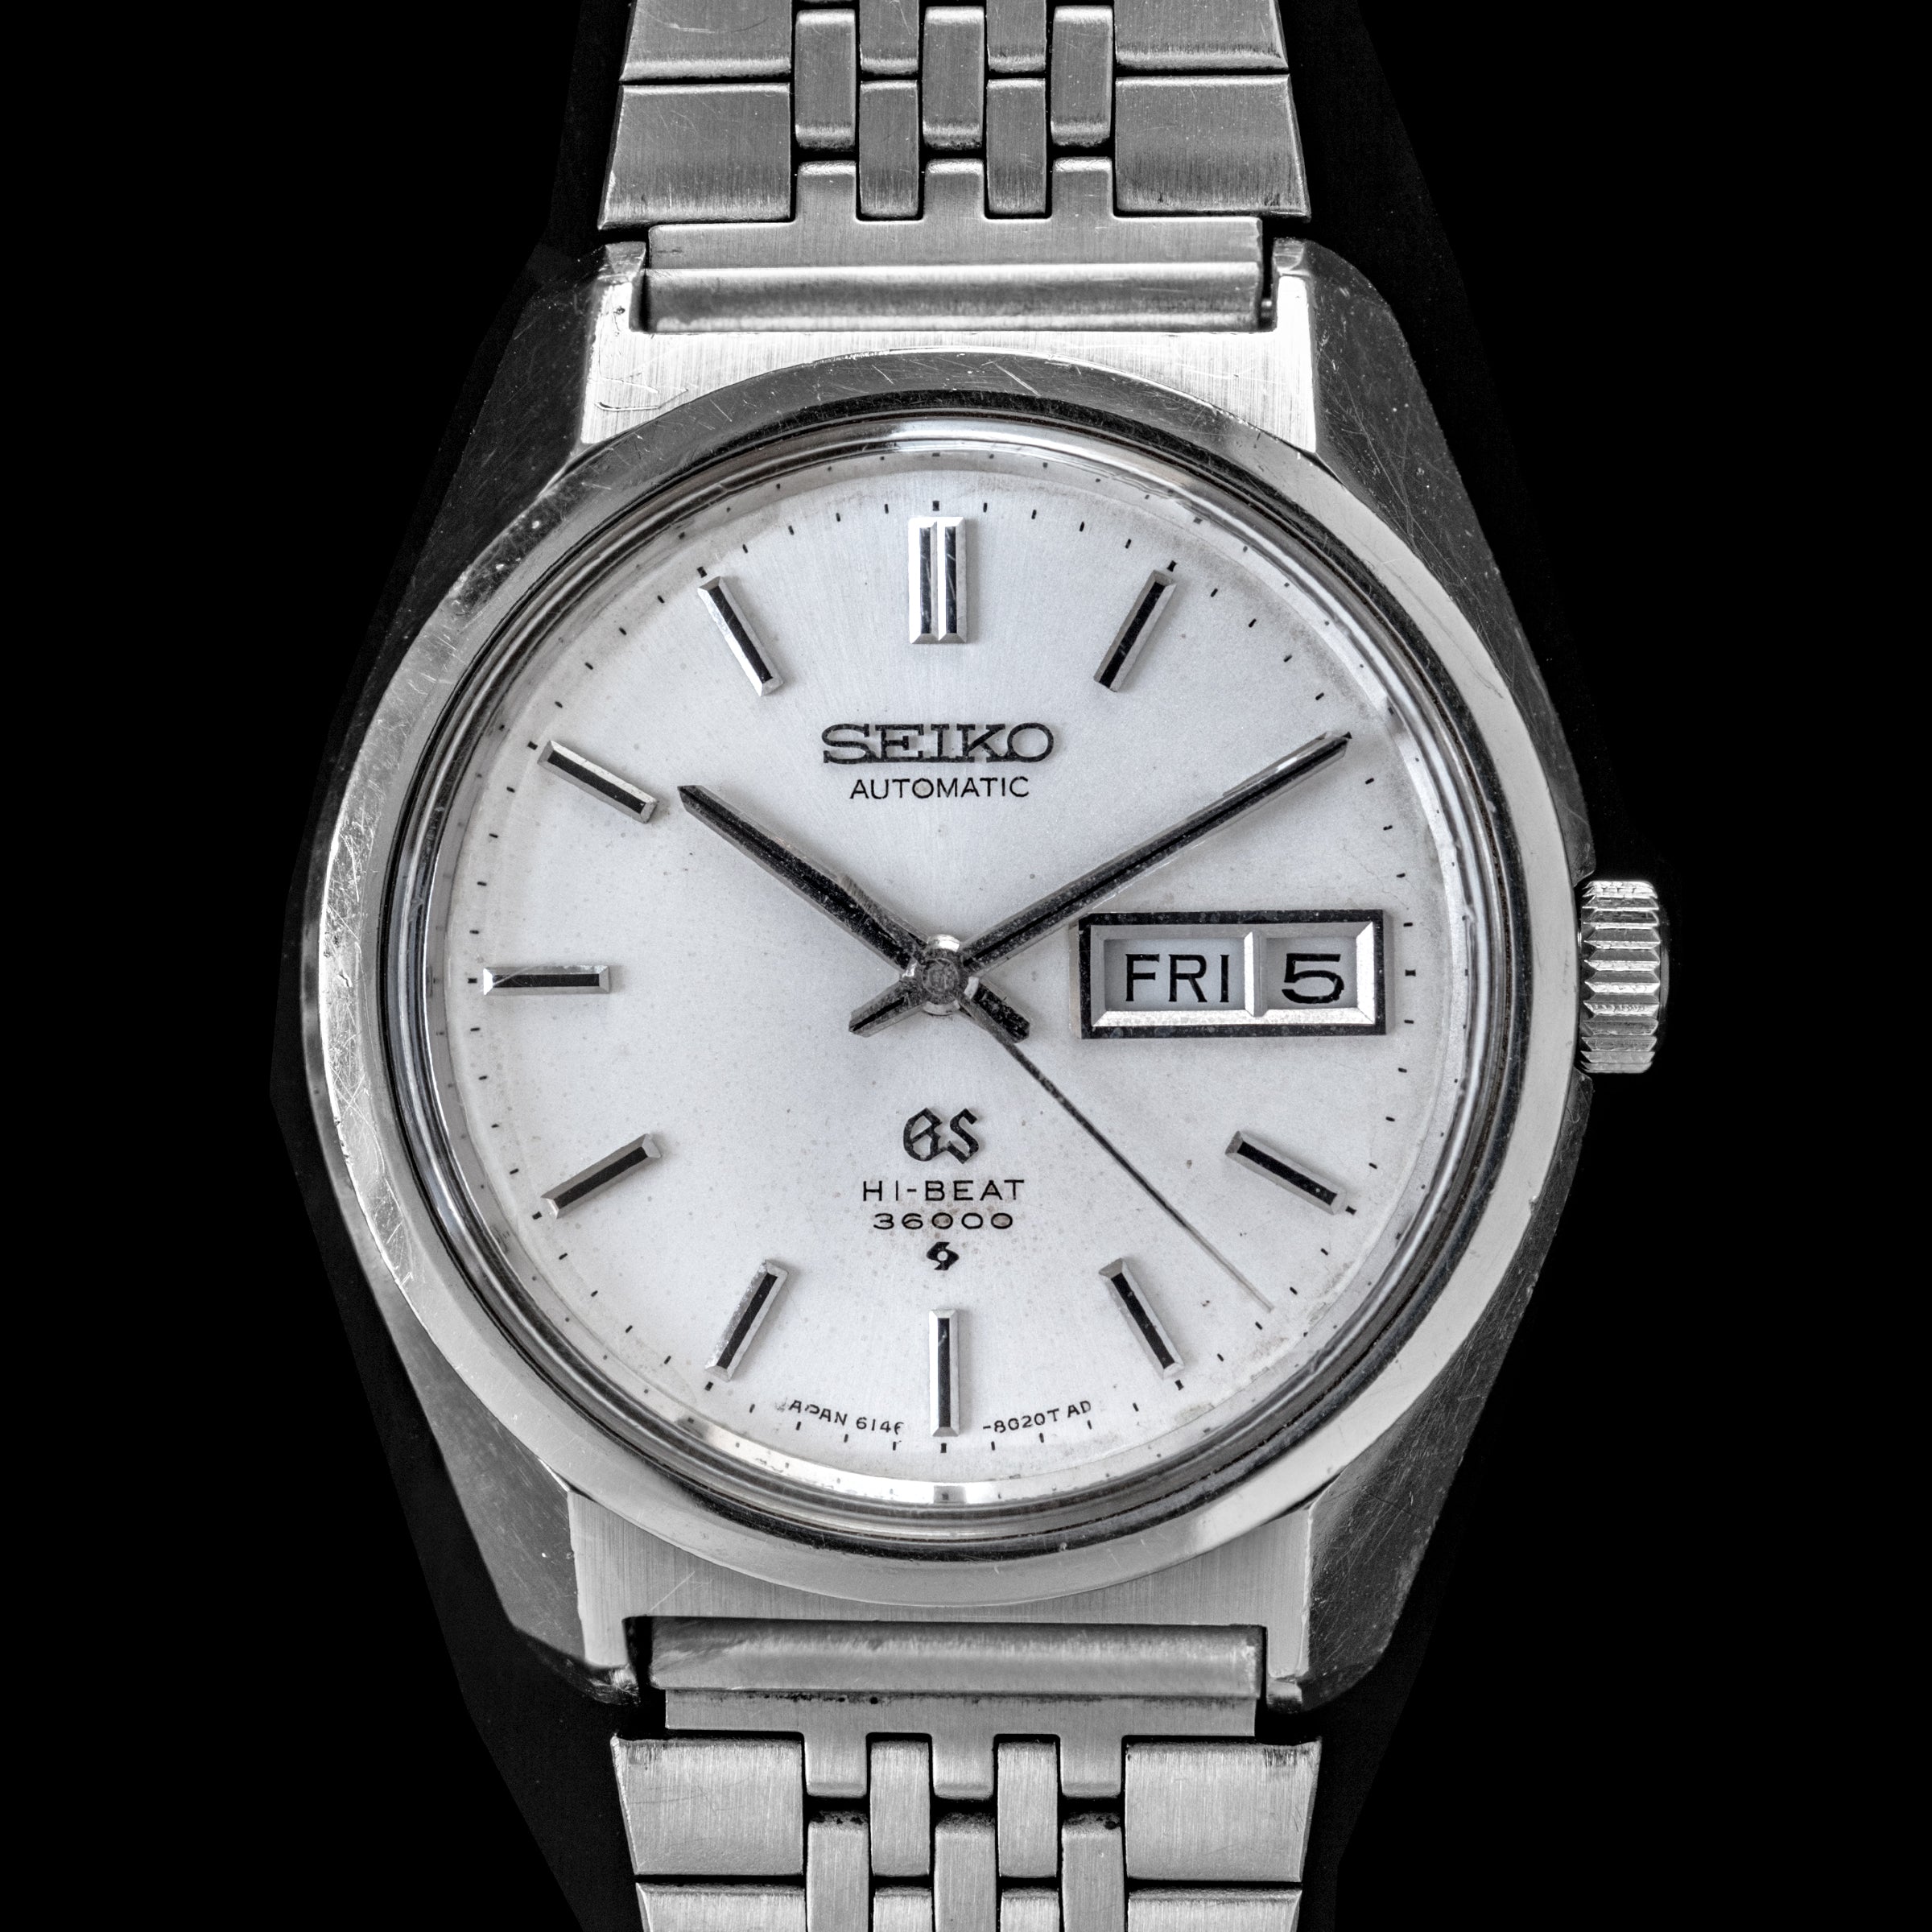 No. 191 / Grand Seiko 61GS Hi-Beat - 1969 – From Time To Times